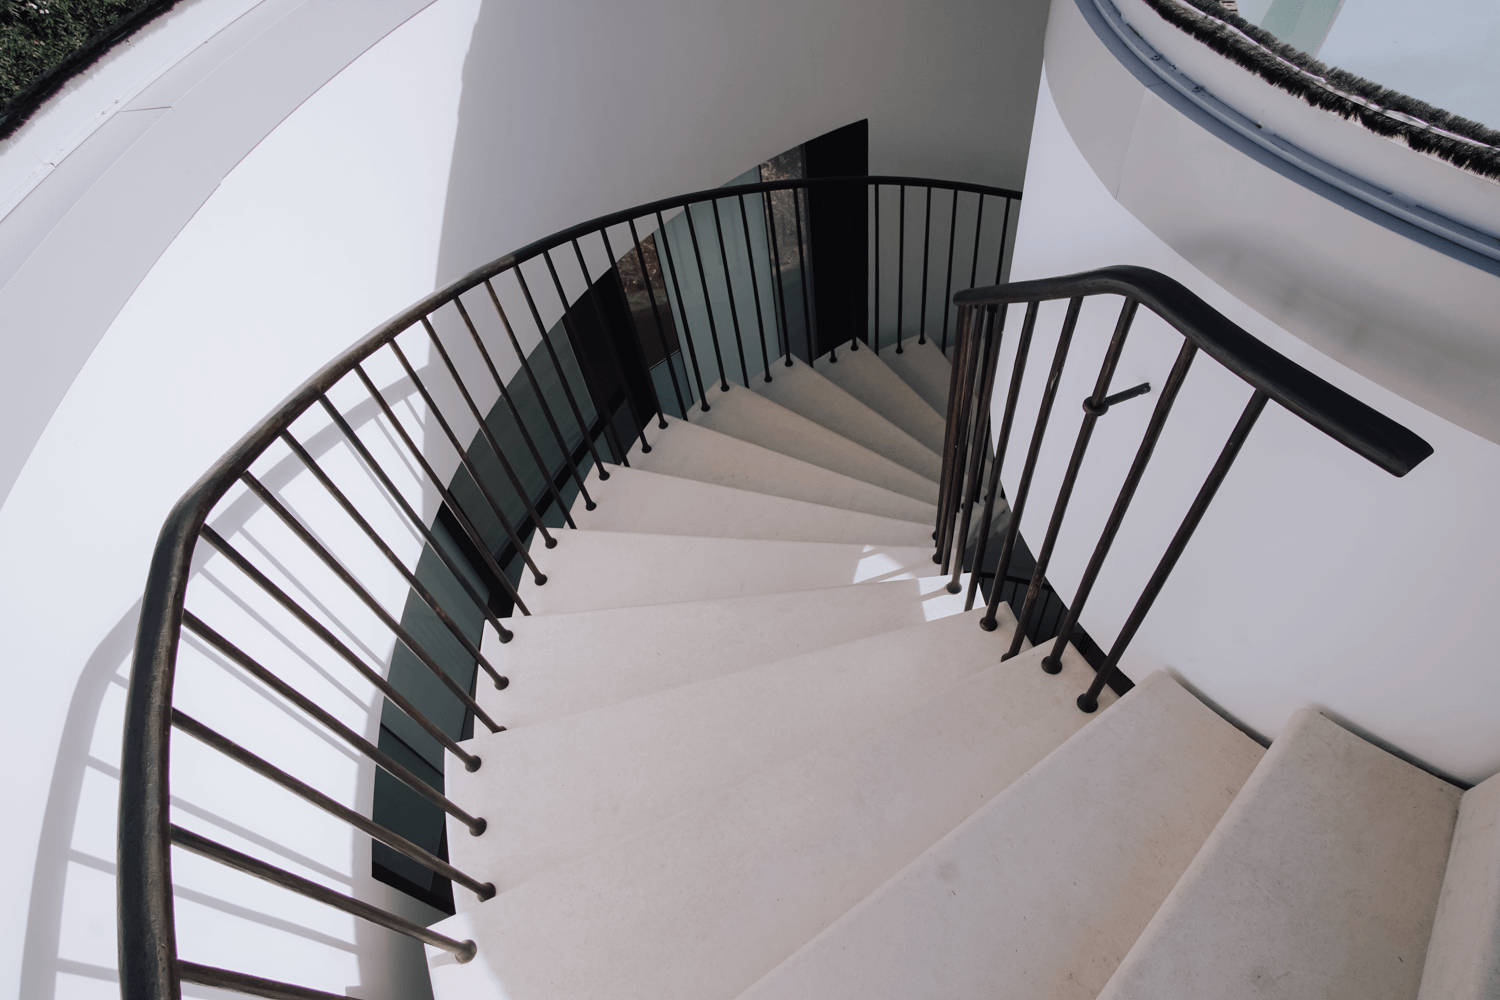 St-Tropez-The-Stonemasonry-Company-Post-Tension-Reinforced-Staircase-4.png